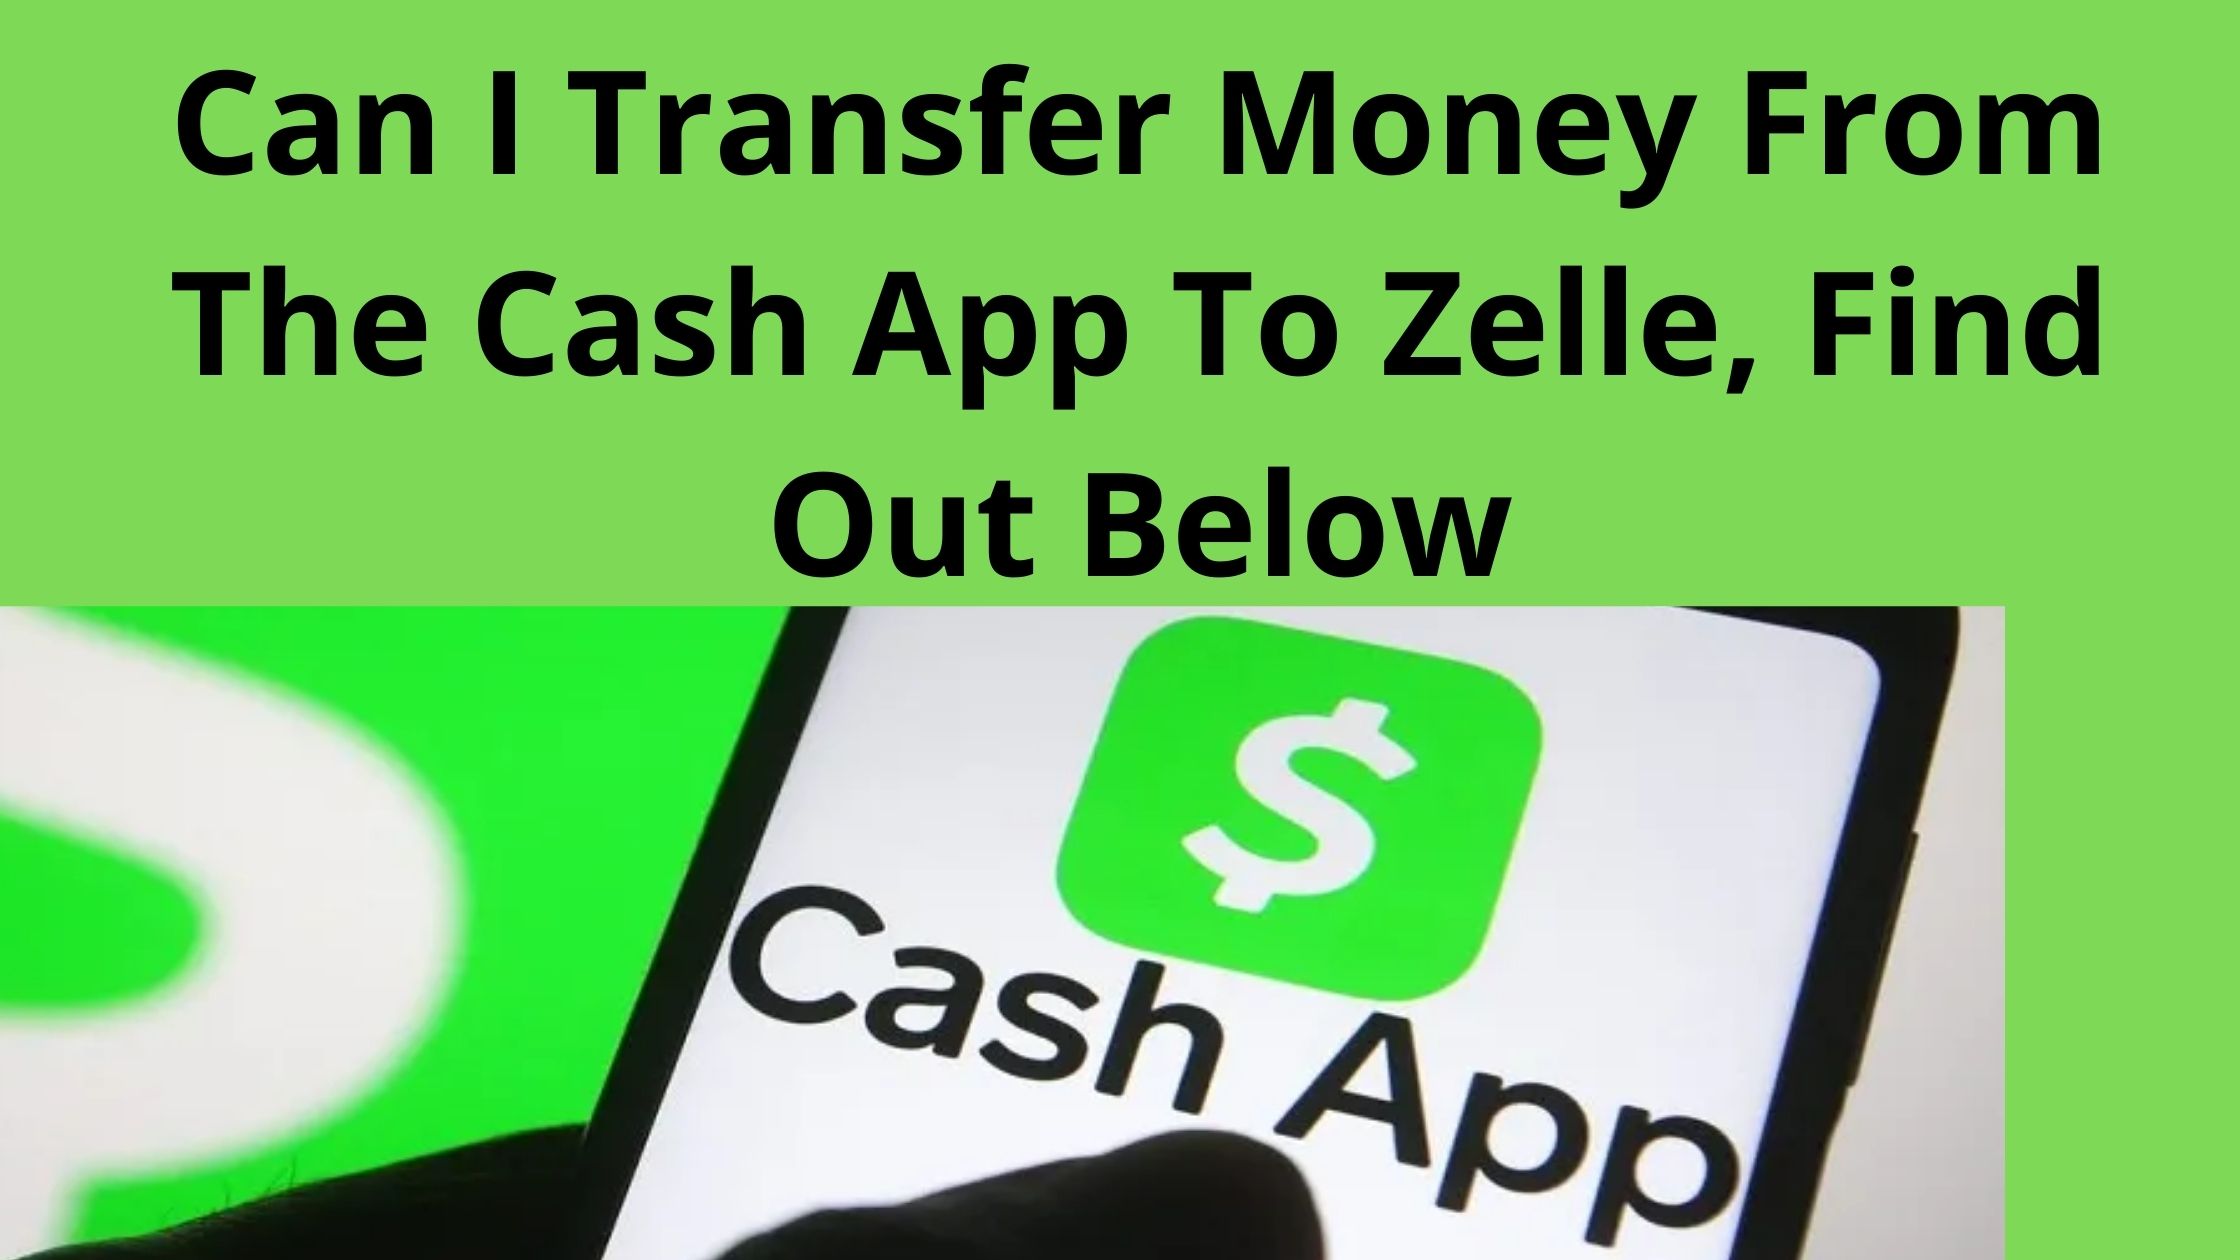 Can I Transfer Money From The Cash App To Zelle, Find Out Below